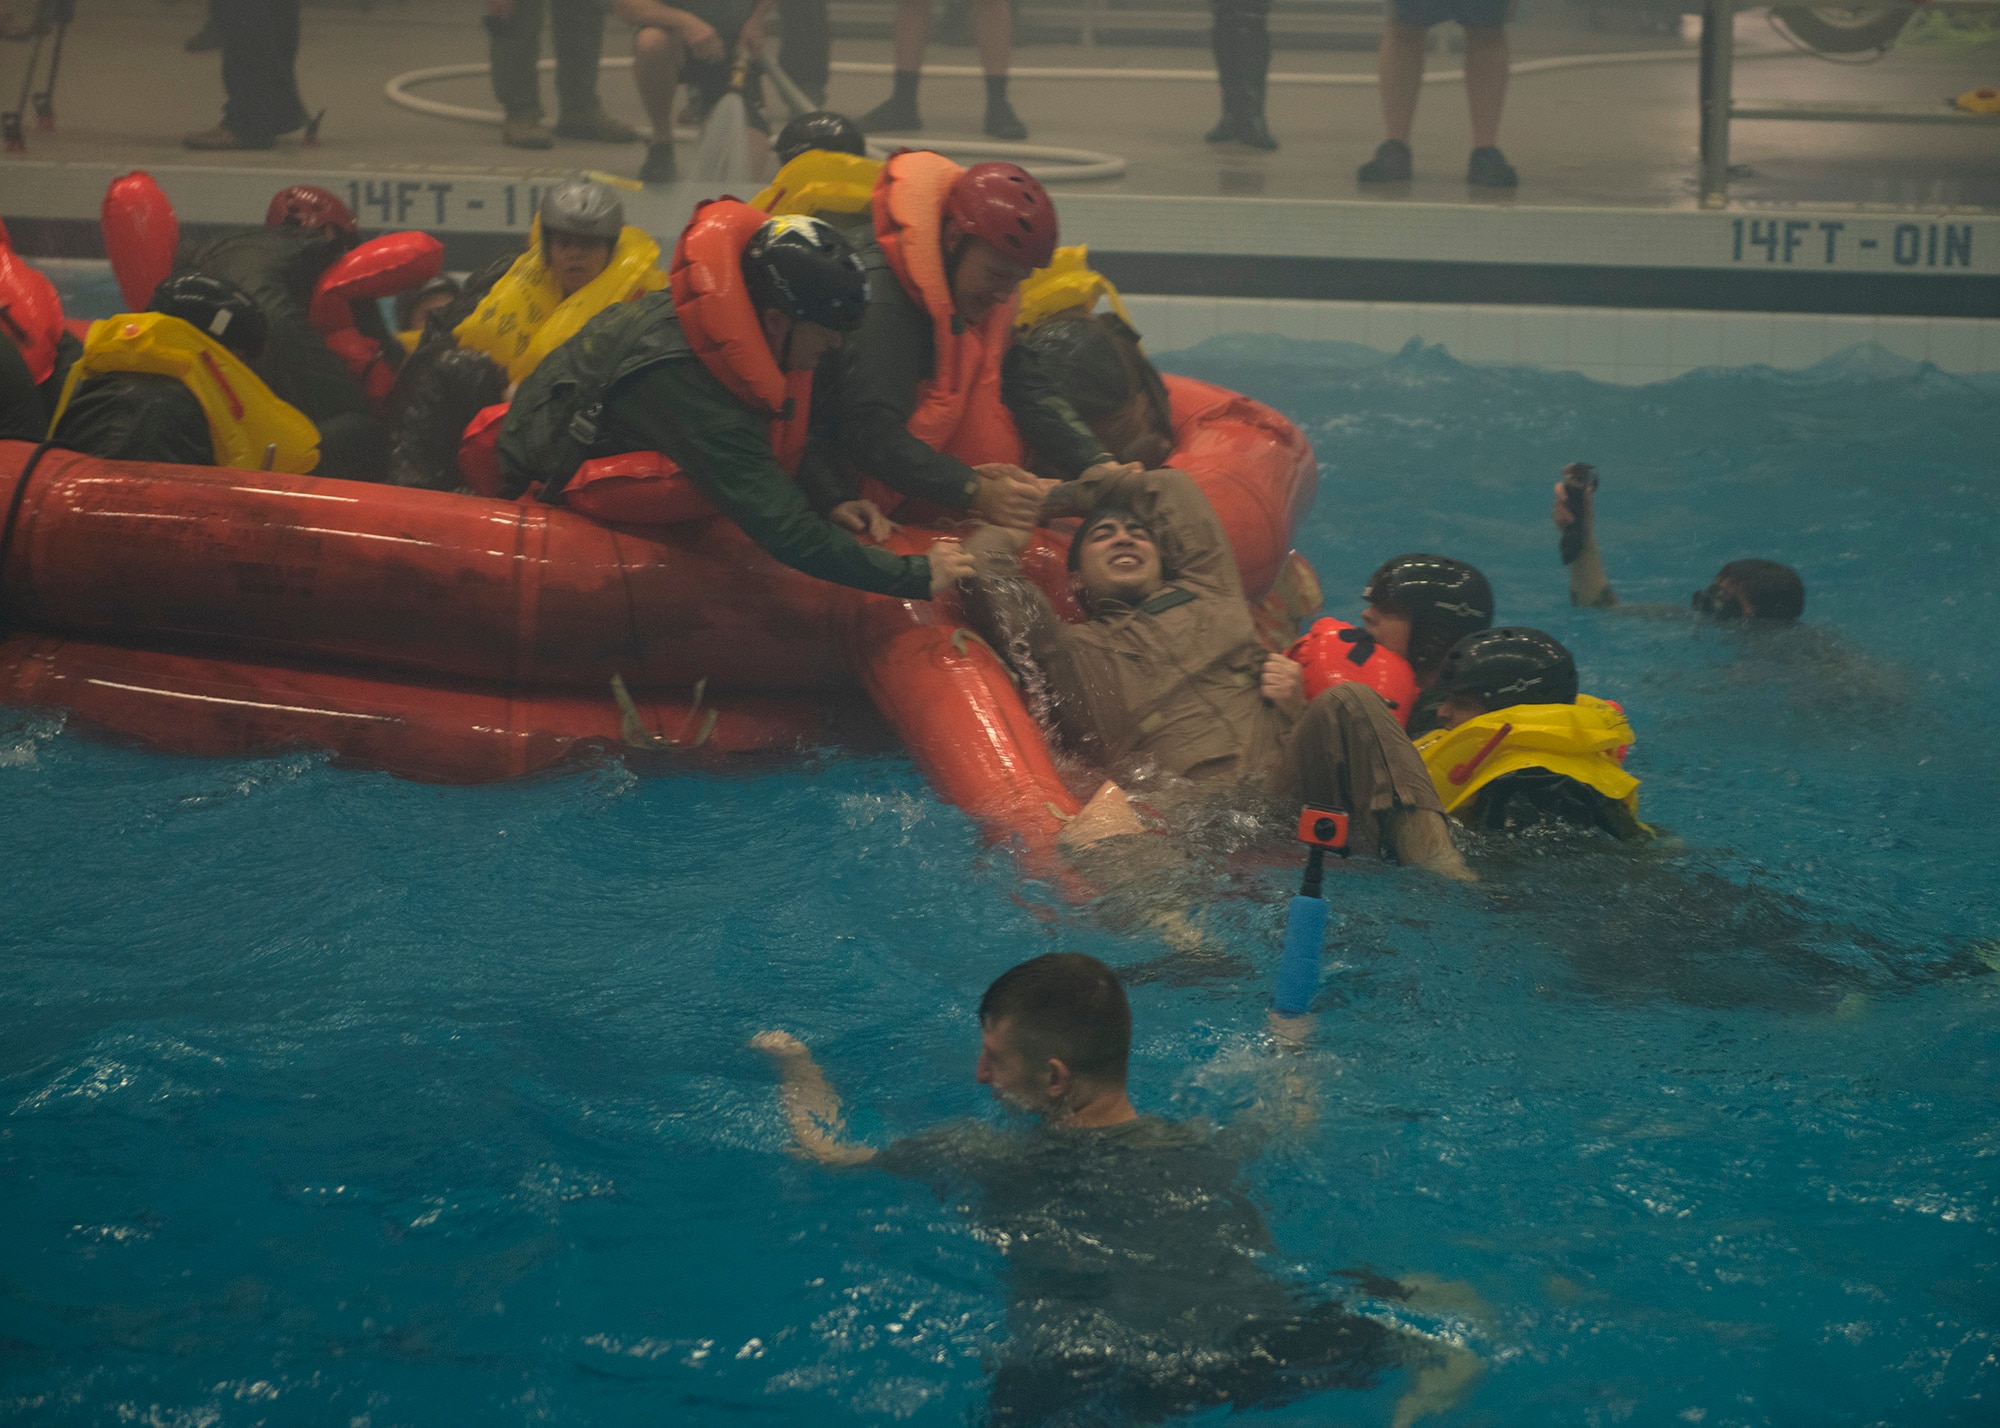 NASA astronauts and Survival School students help pull survivors into a life raft during a simulation Feb. 10, 2017, at Fairchild Air Force Base, Wash. Water survival instructors are hands on teachers, jumping into the action alongside their students. (U.S. Air Force photo/ Airman 1st Class Ryan Lackey)